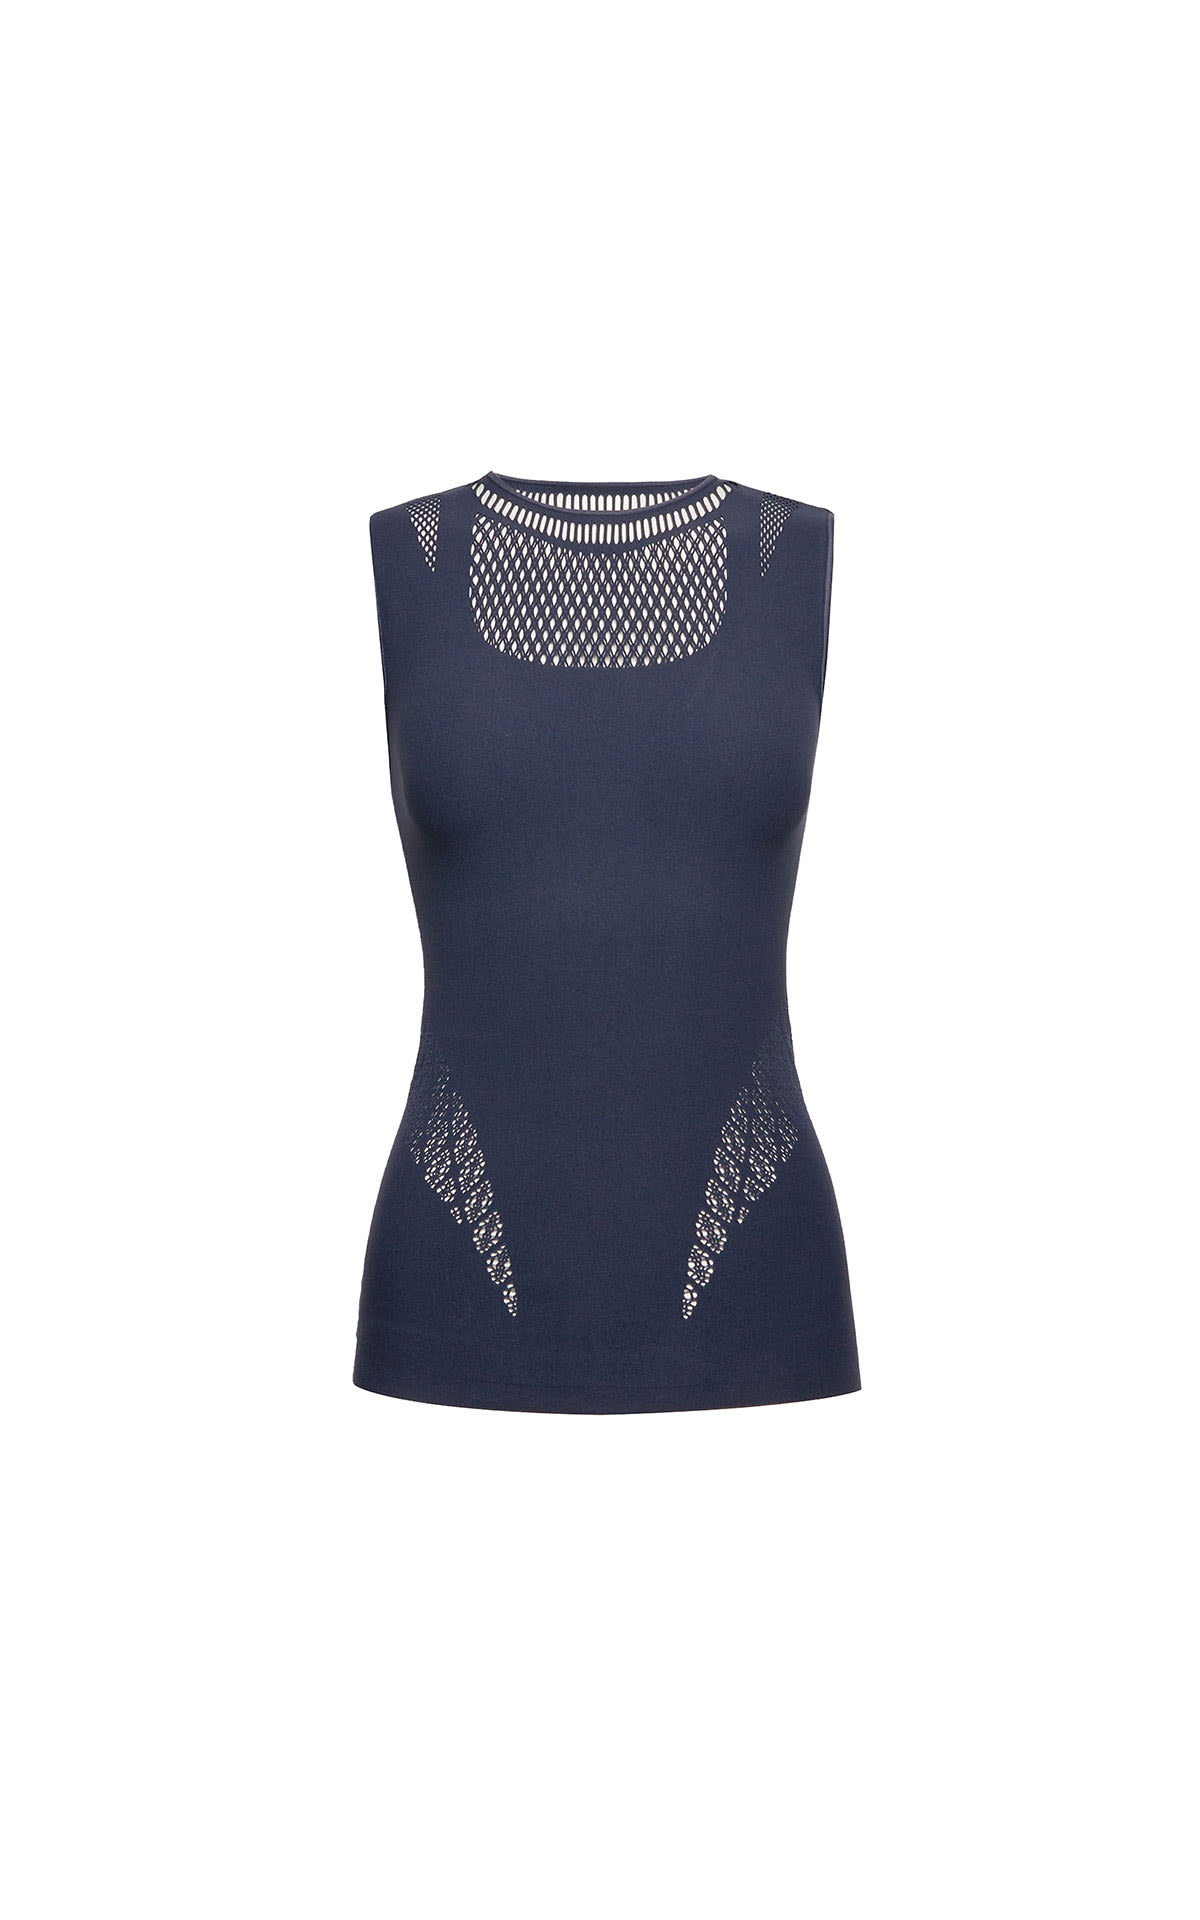 Wolford Shuri top from Bicester Village